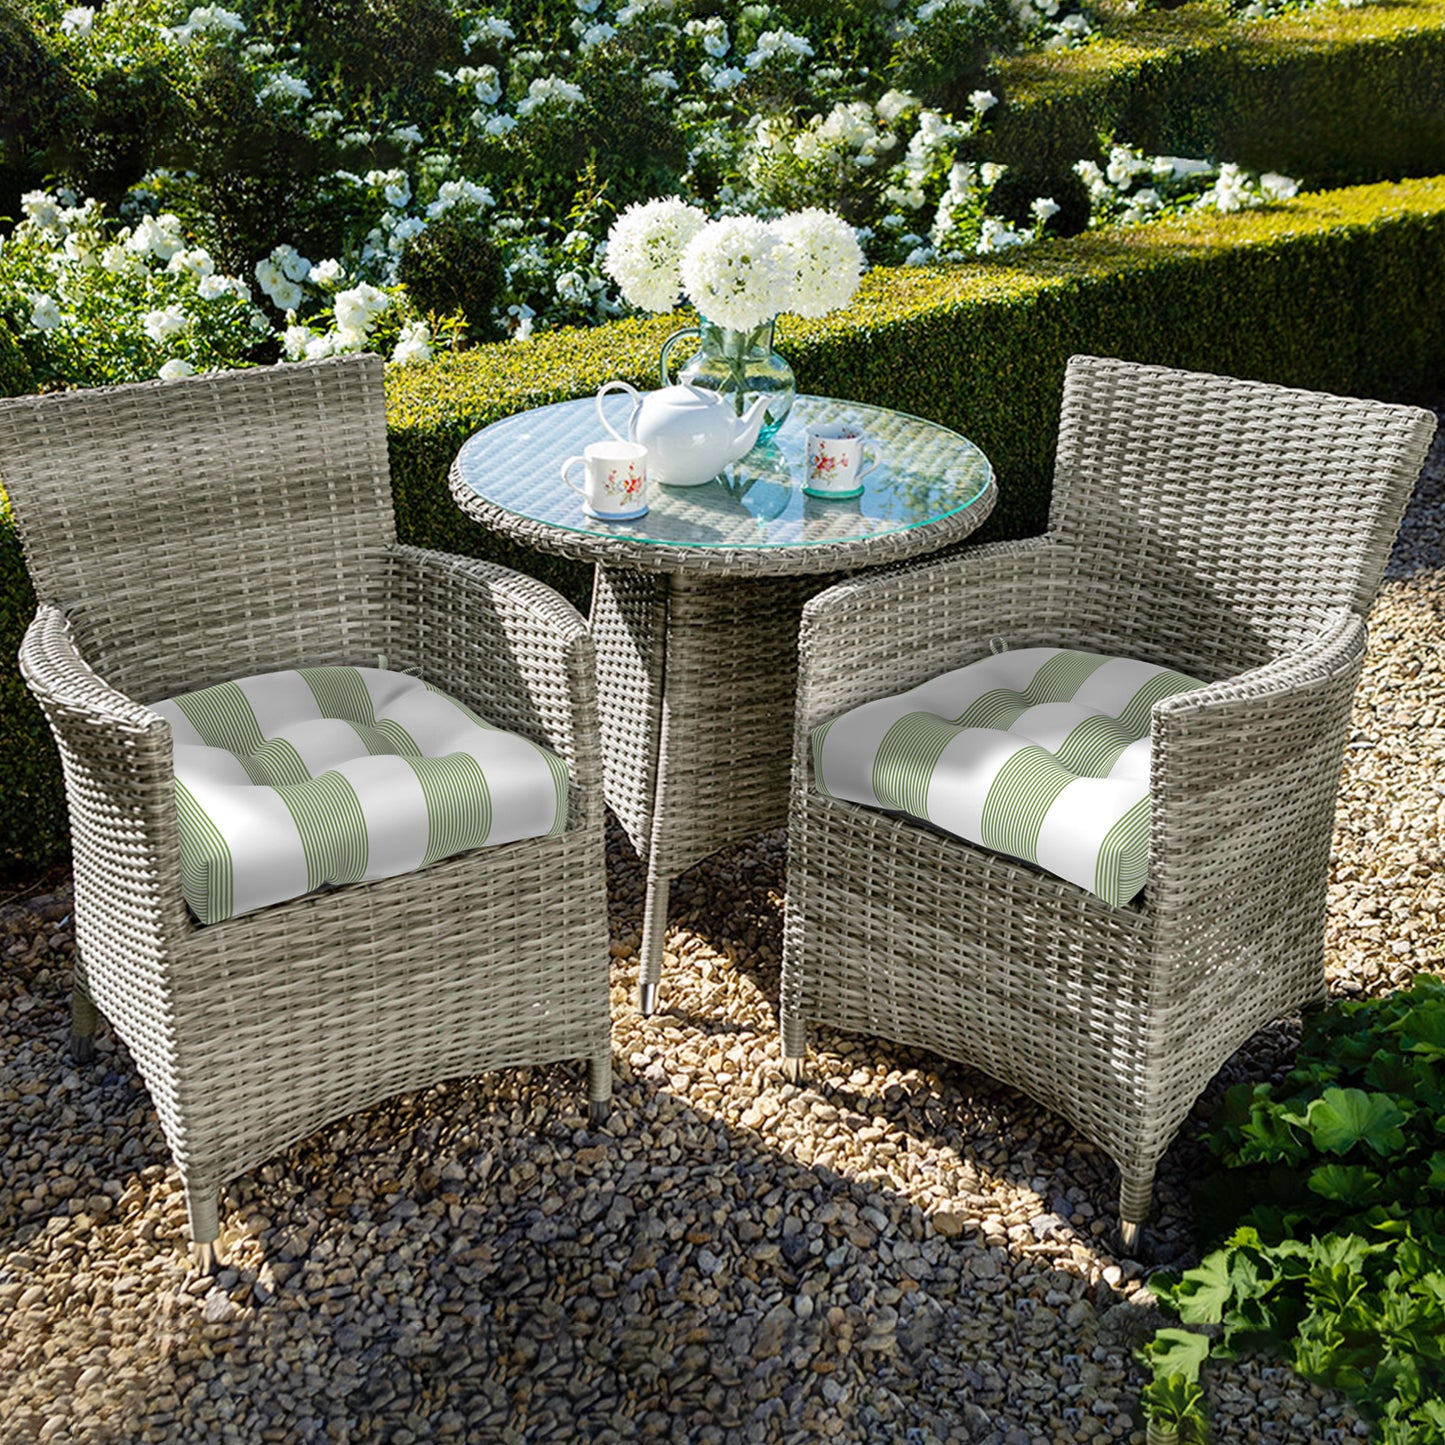 Melody Elephant Patio Wicker Chair Cushions, All Weather Outdoor Tufted Chair Pads Pack of 2, 19 x 19 x 5 Inch U-Shaped Seat Cushions of Garden Furniture Decoration, Stripe Cabana Green